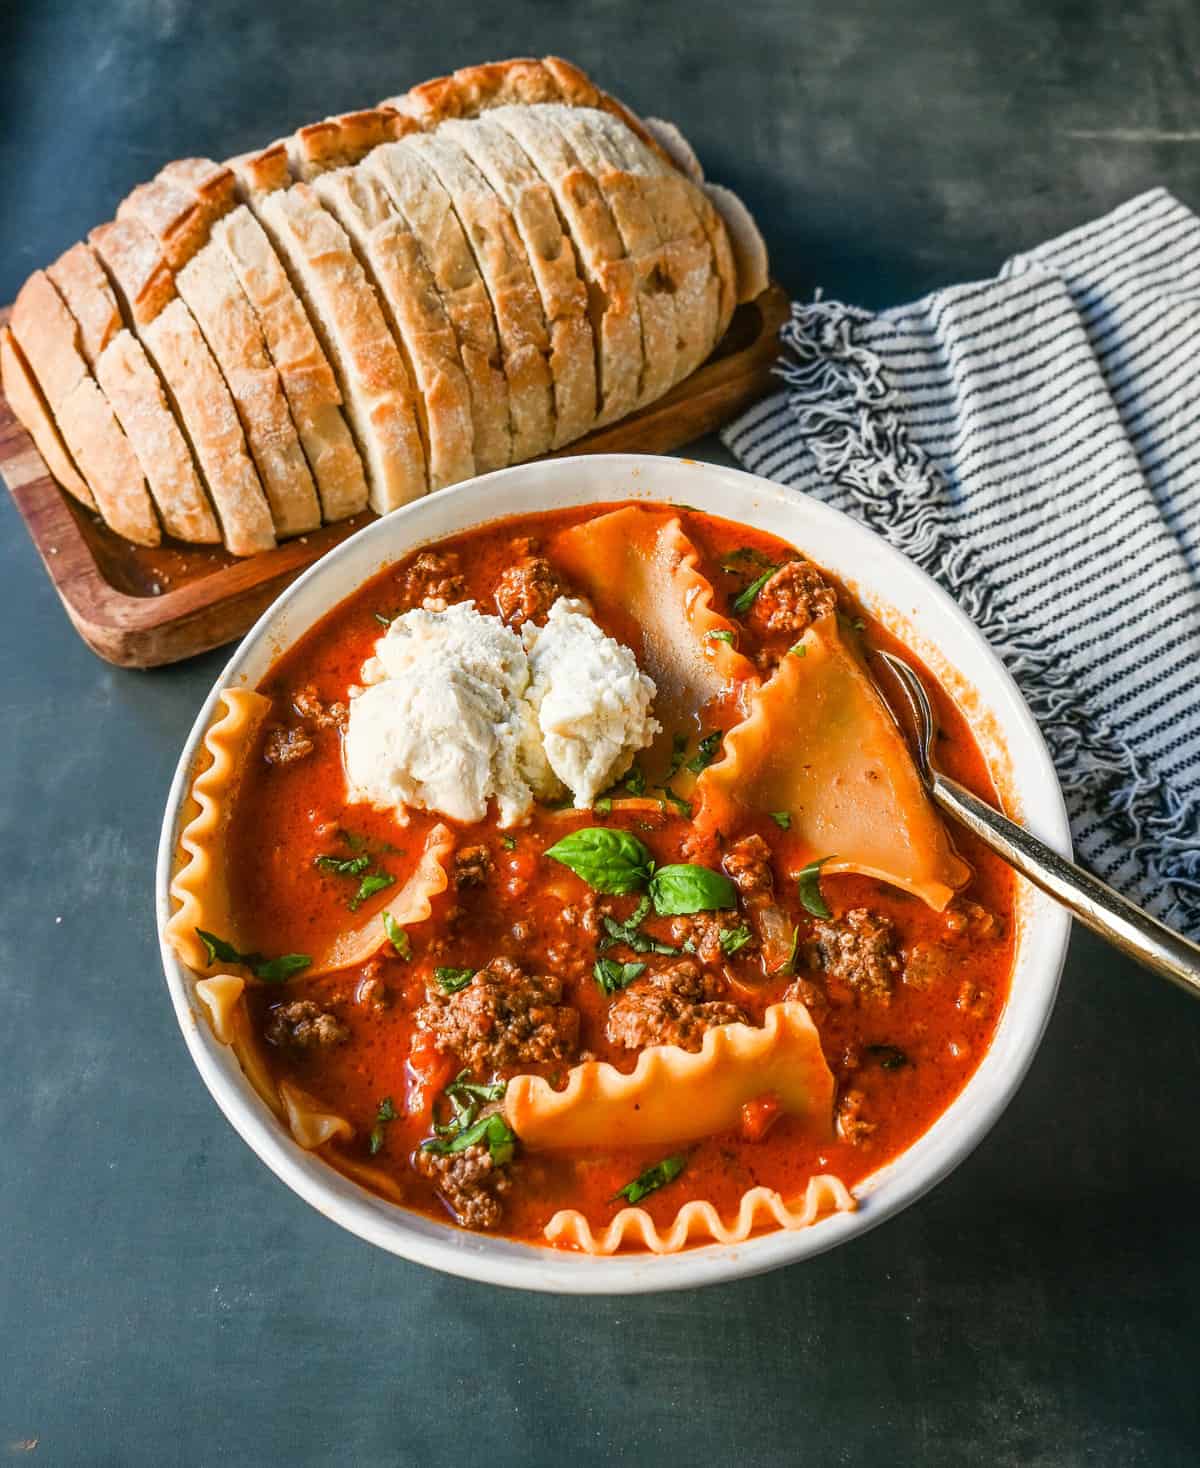 The viral Tik Tok Lasagna Soup! A hearty beef lasagna soup with fresh ricotta cheese, mozzarella, parmesan cheese, and fresh herbs. An Italian classic recipe made into a comforting soup! This is the best lasagna soup recipe!